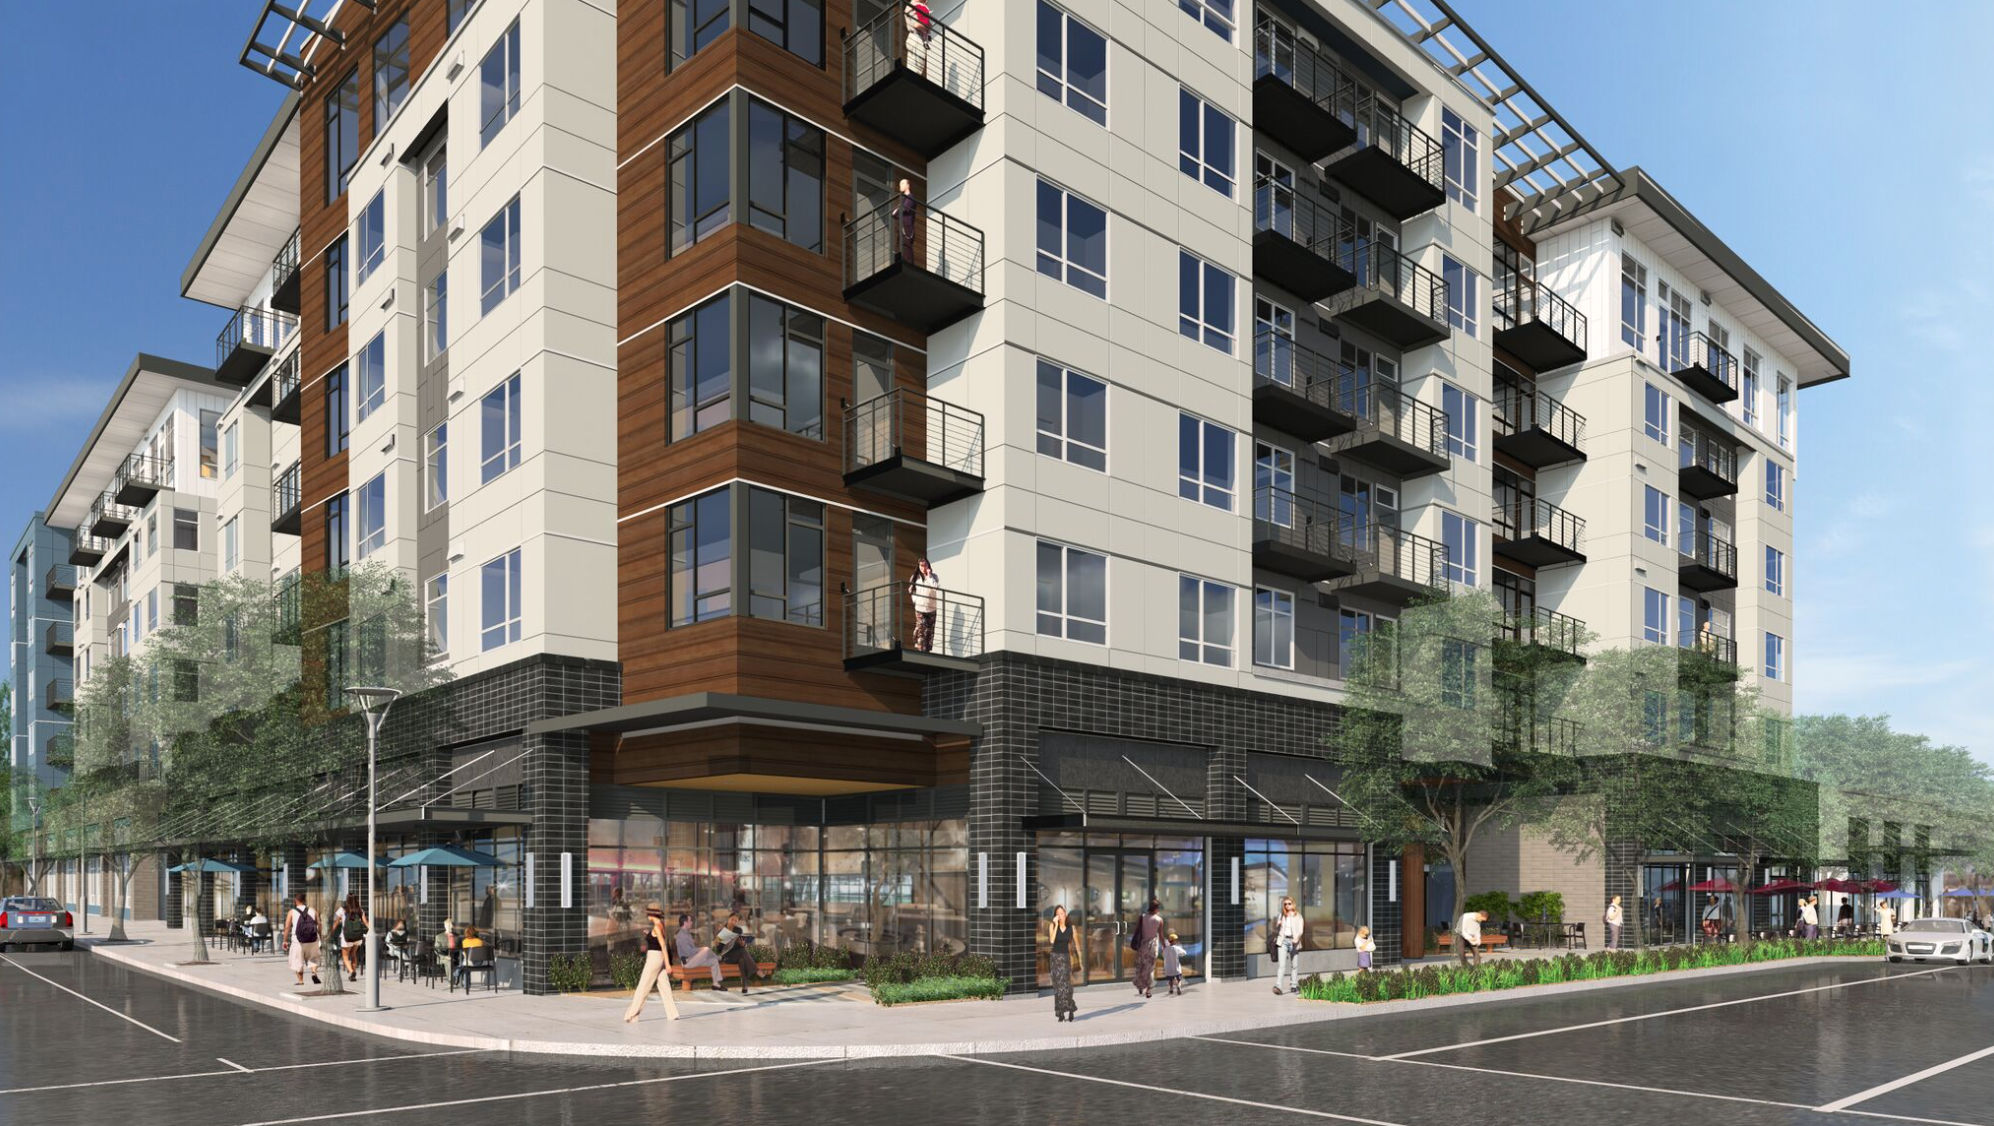 rendering of Sky Sammamish project from the street corner, showcasing street level retail with multifamily units with balconies above